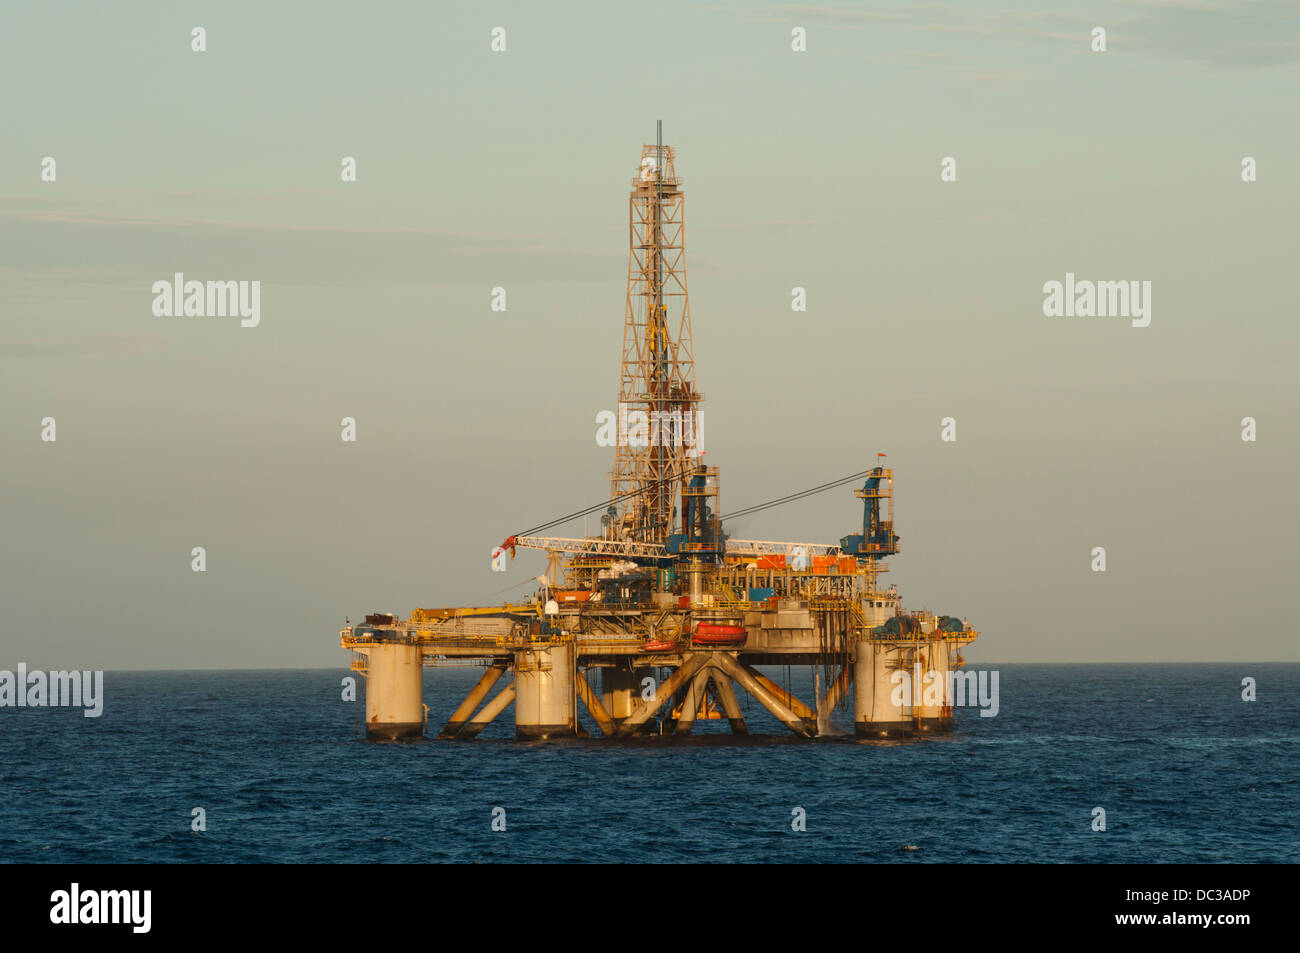 Offshore oil drilling rig Stock Photo